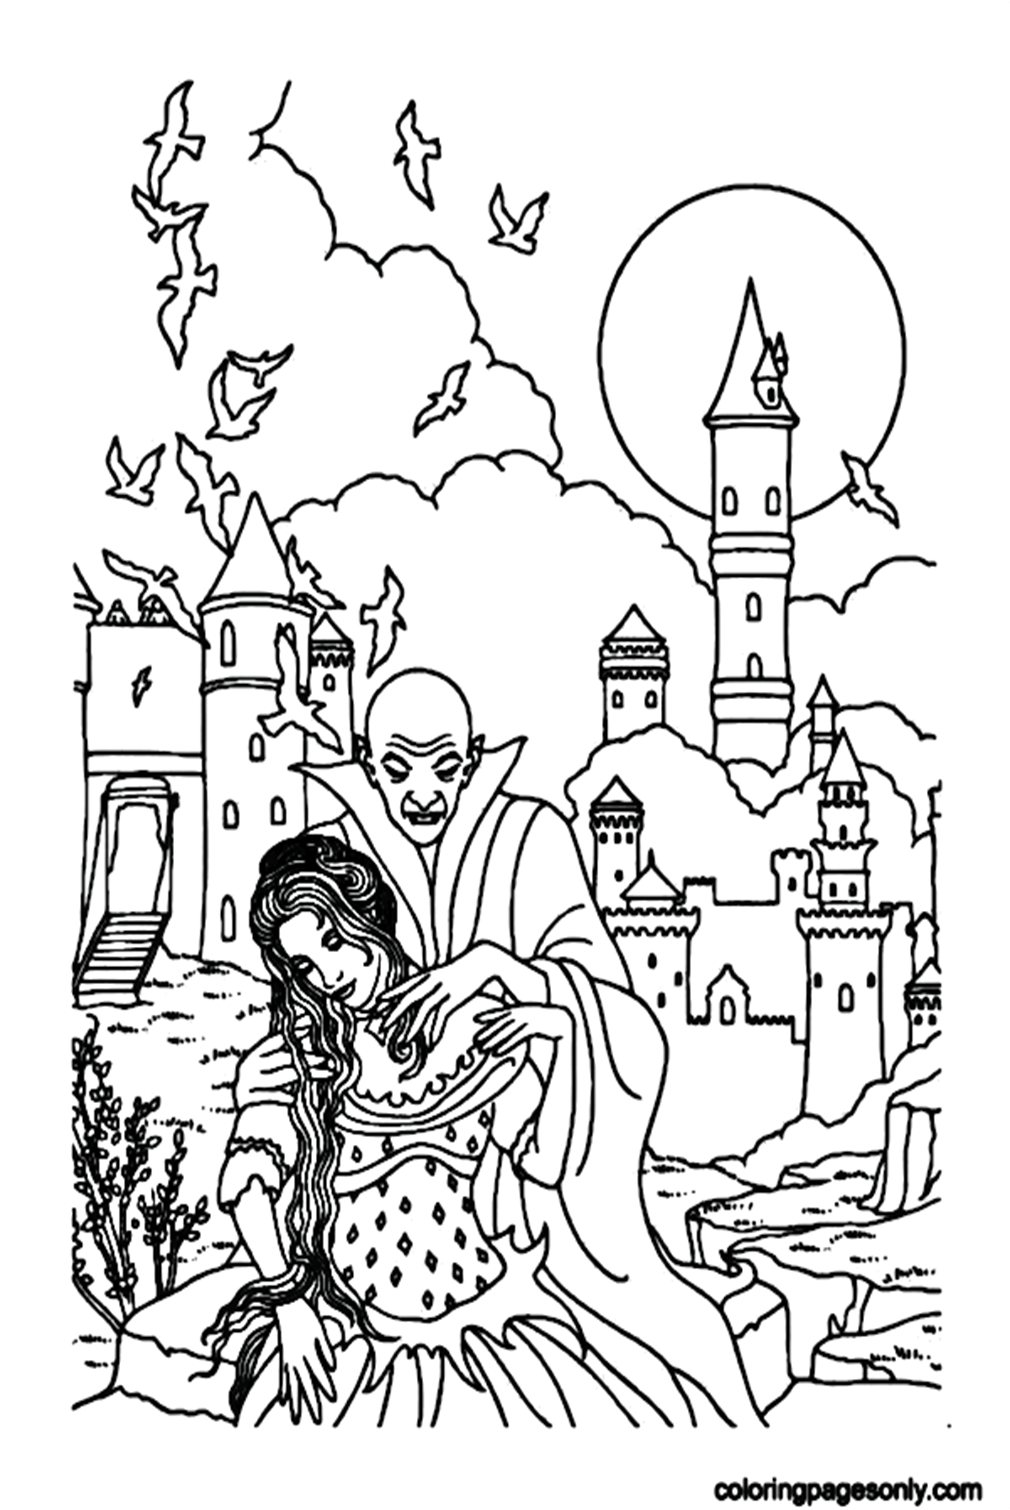 Dracula’s Victims Coloring Pages